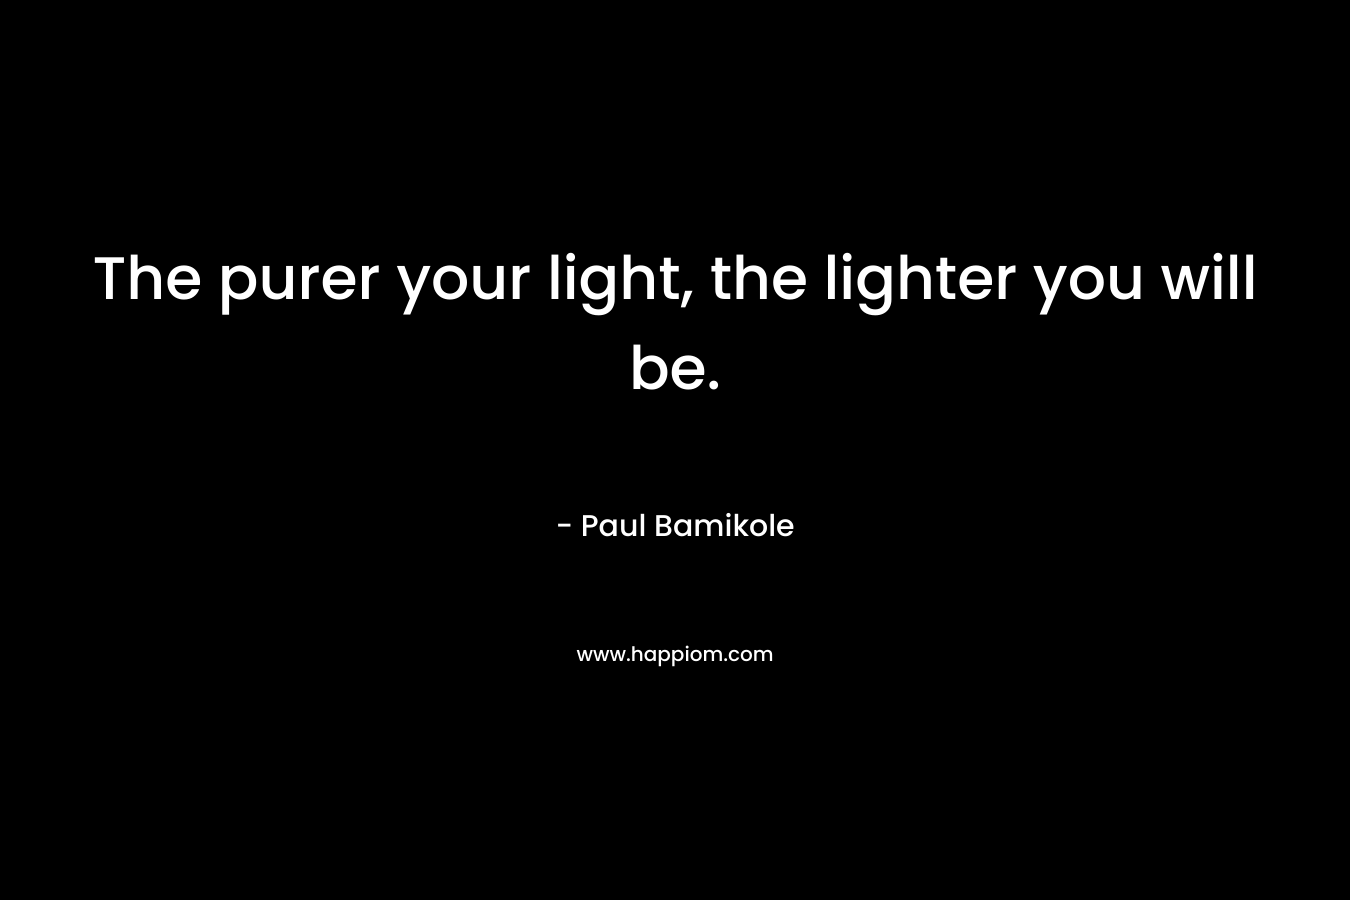 The purer your light, the lighter you will be. – Paul Bamikole